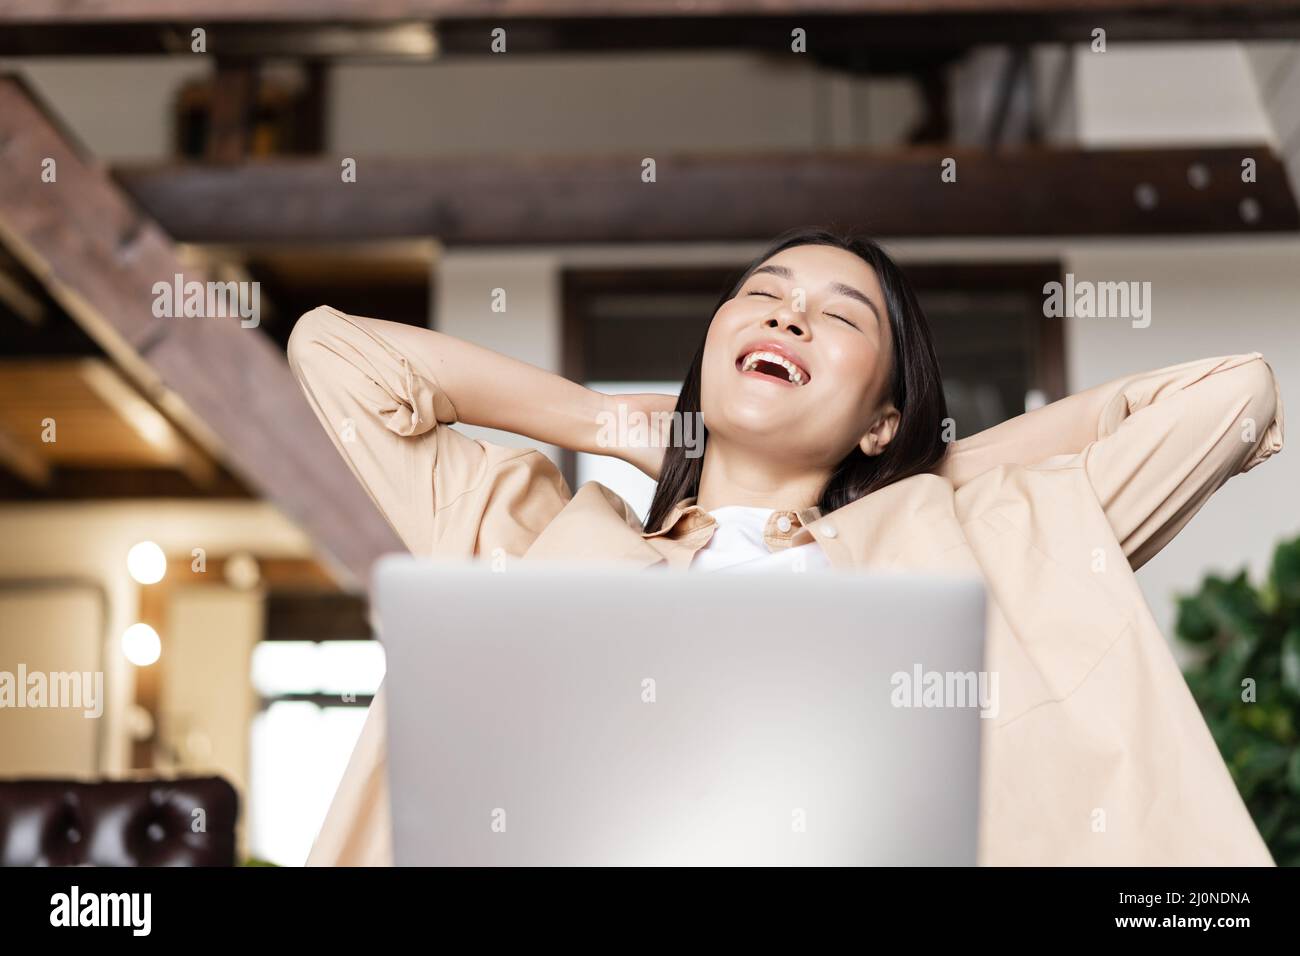 Smiling asian girl relaxing with laptop at home, lay back with hands behind head and pleased face expression Stock Photo